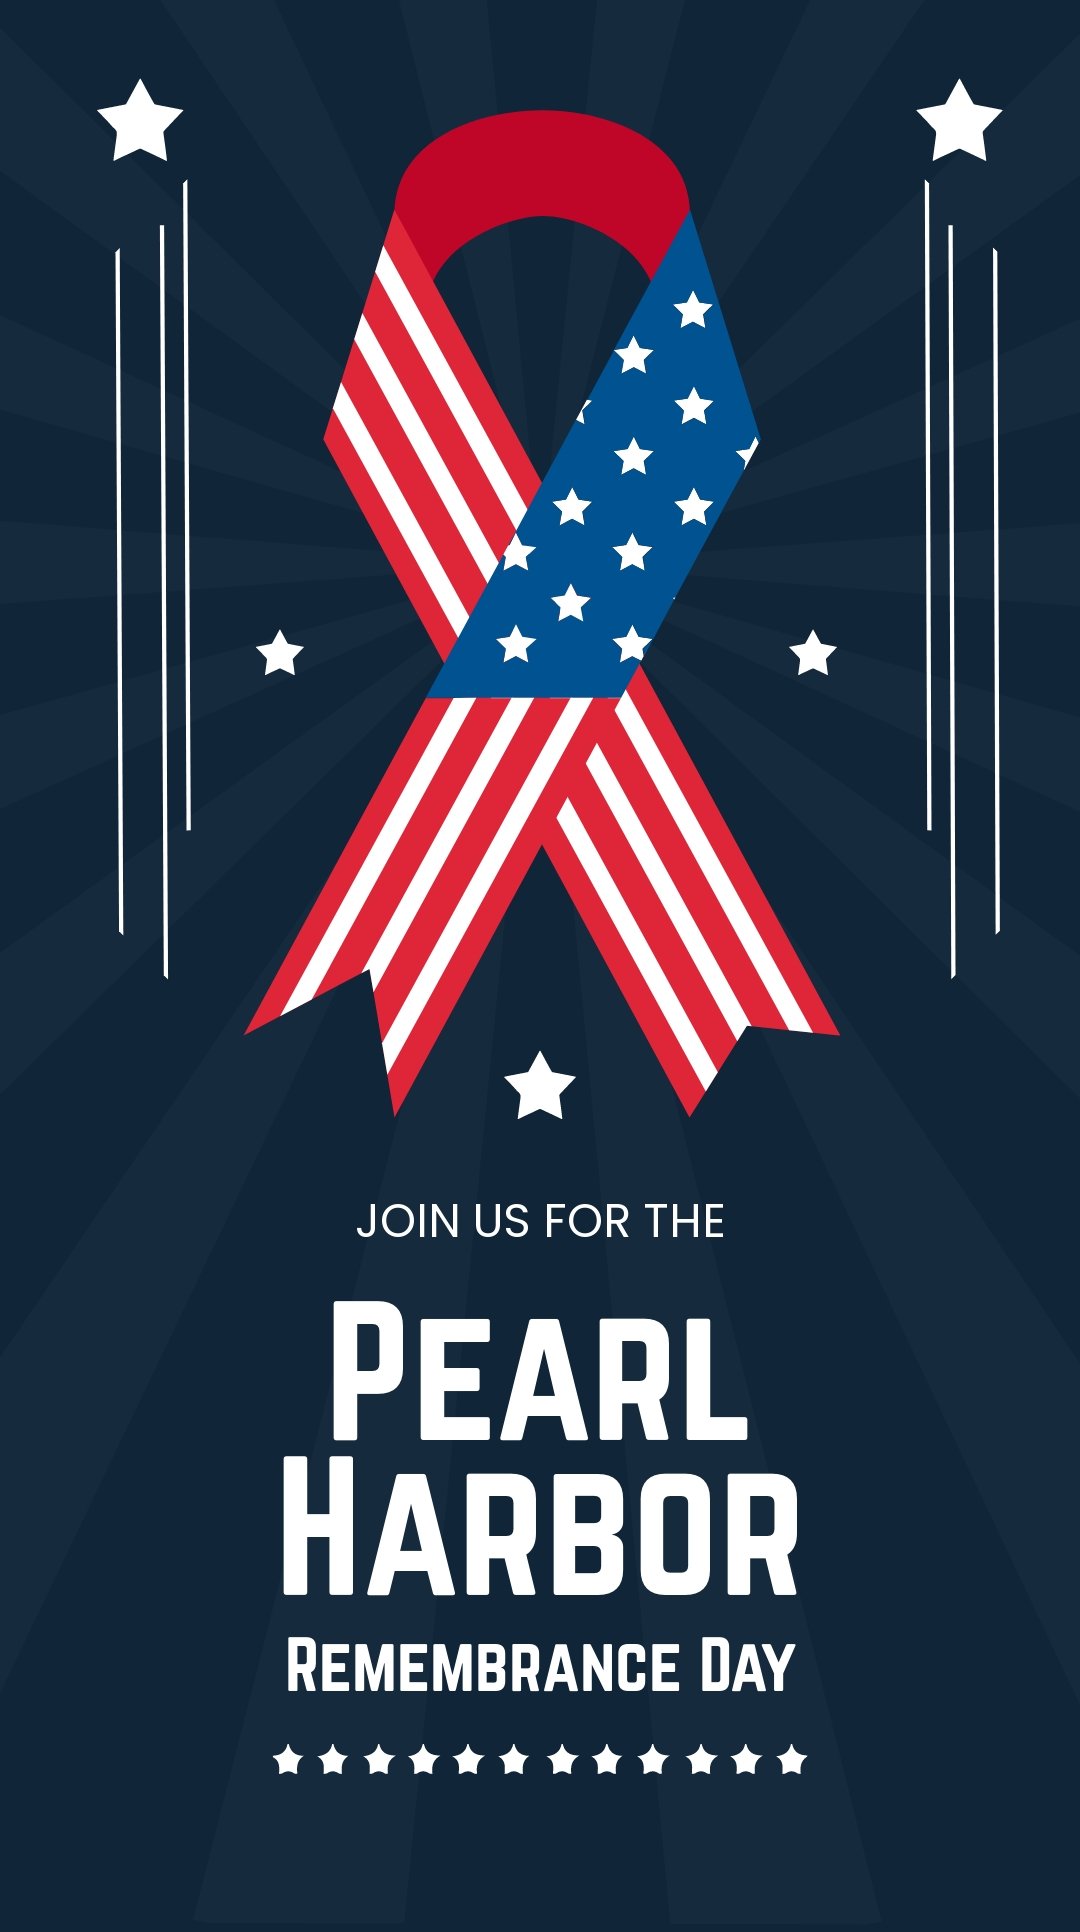 Free Pearl Harbor Remembrance Day Instagram Story Template